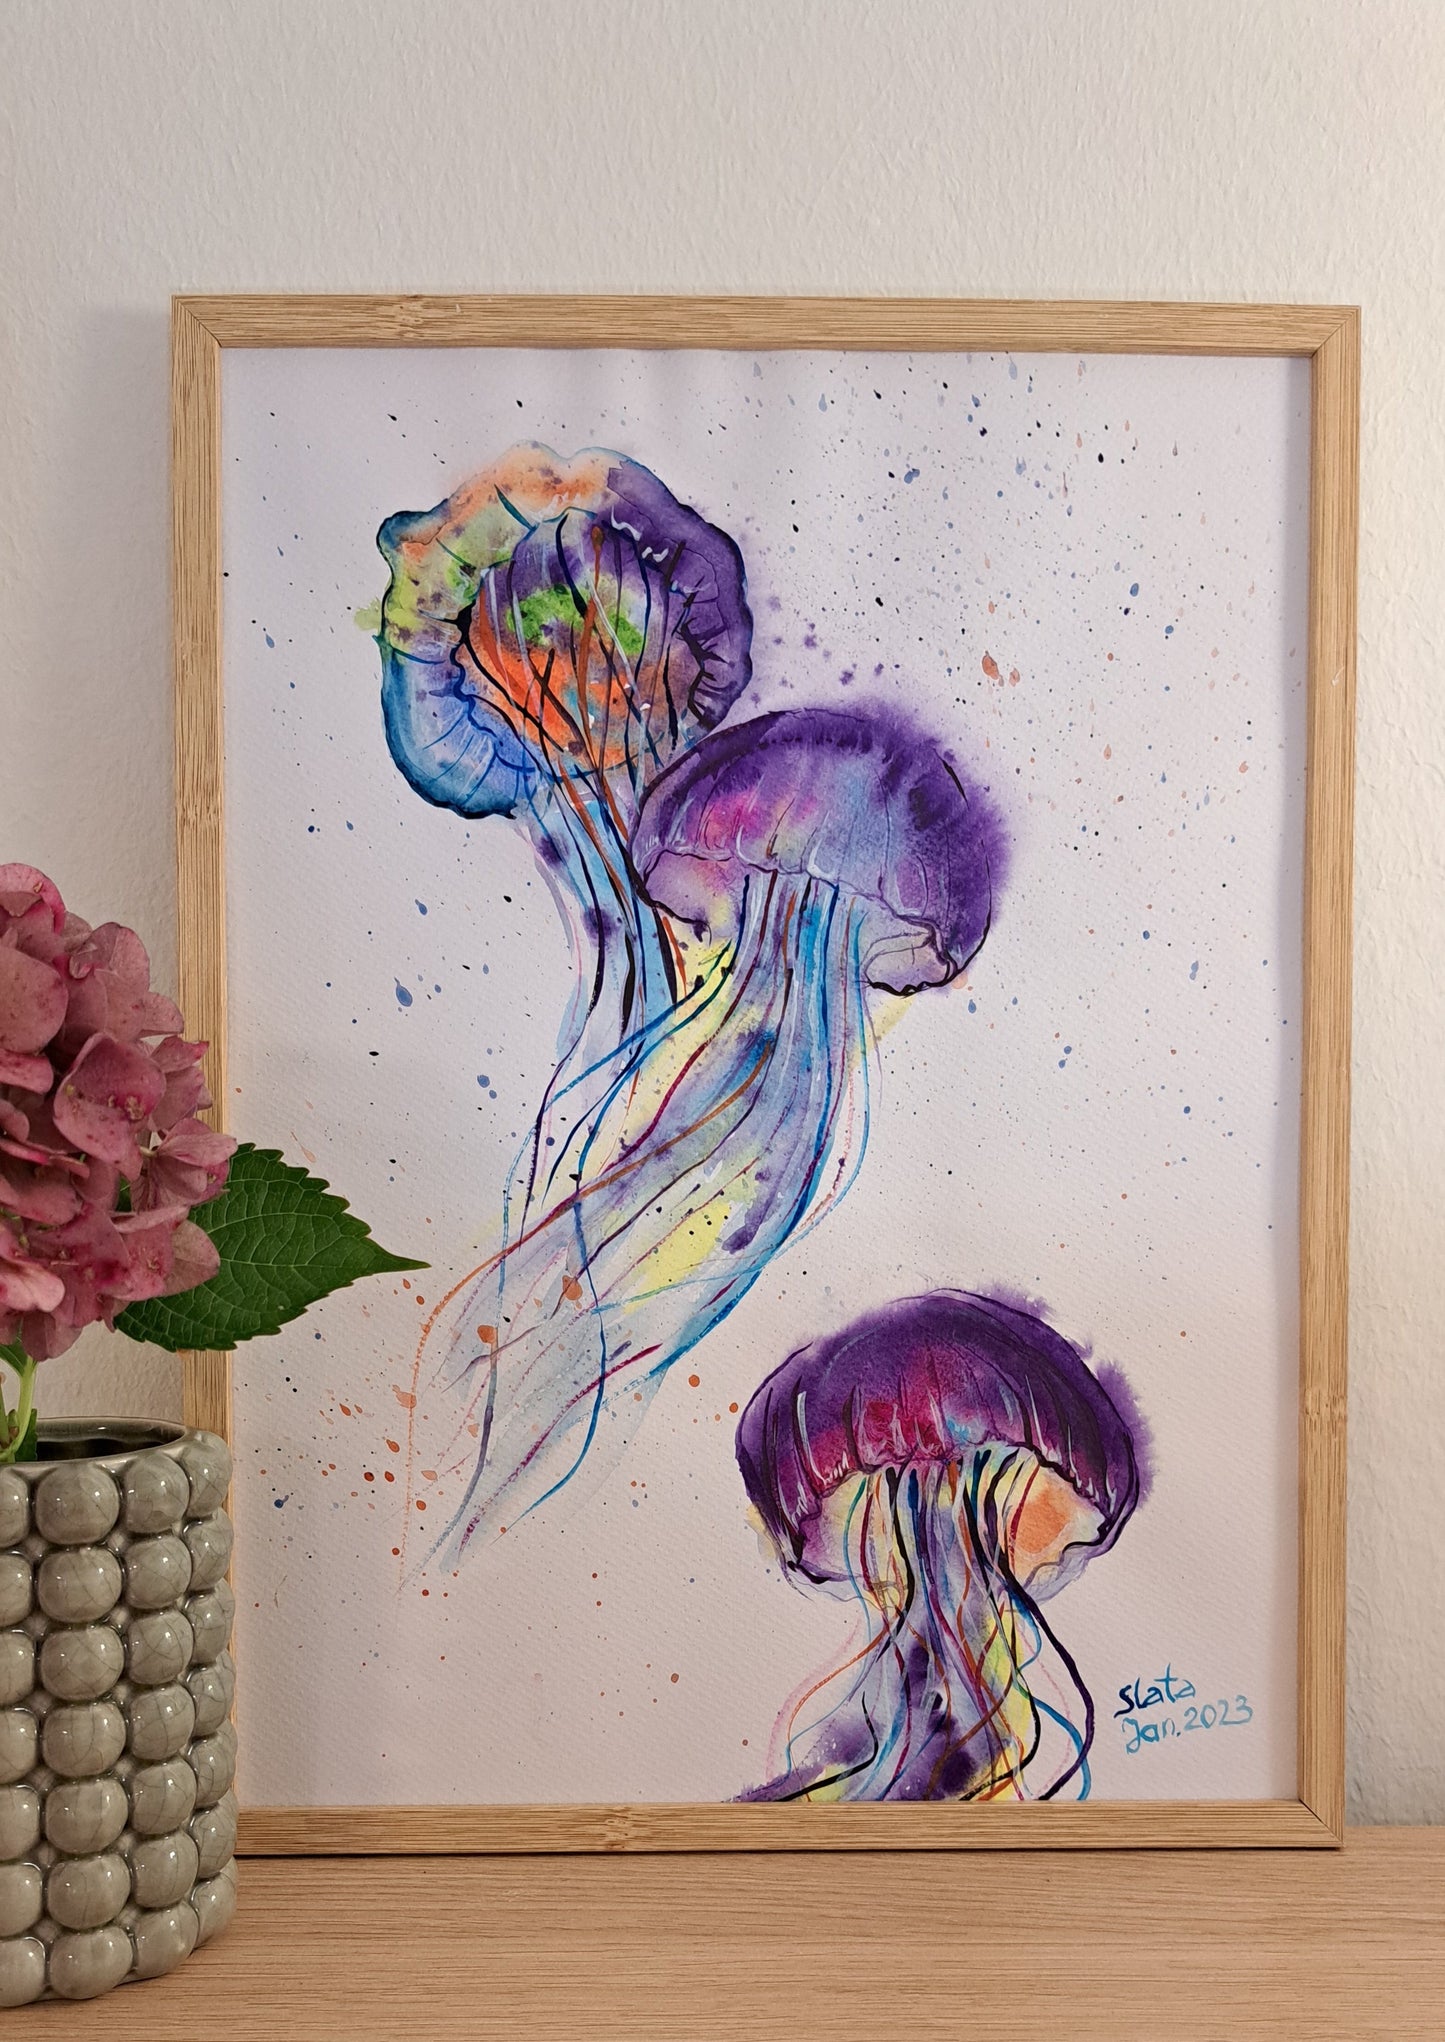 Unique Art & Lively Watercolor Workshop with Slata in Hamburg, Germany